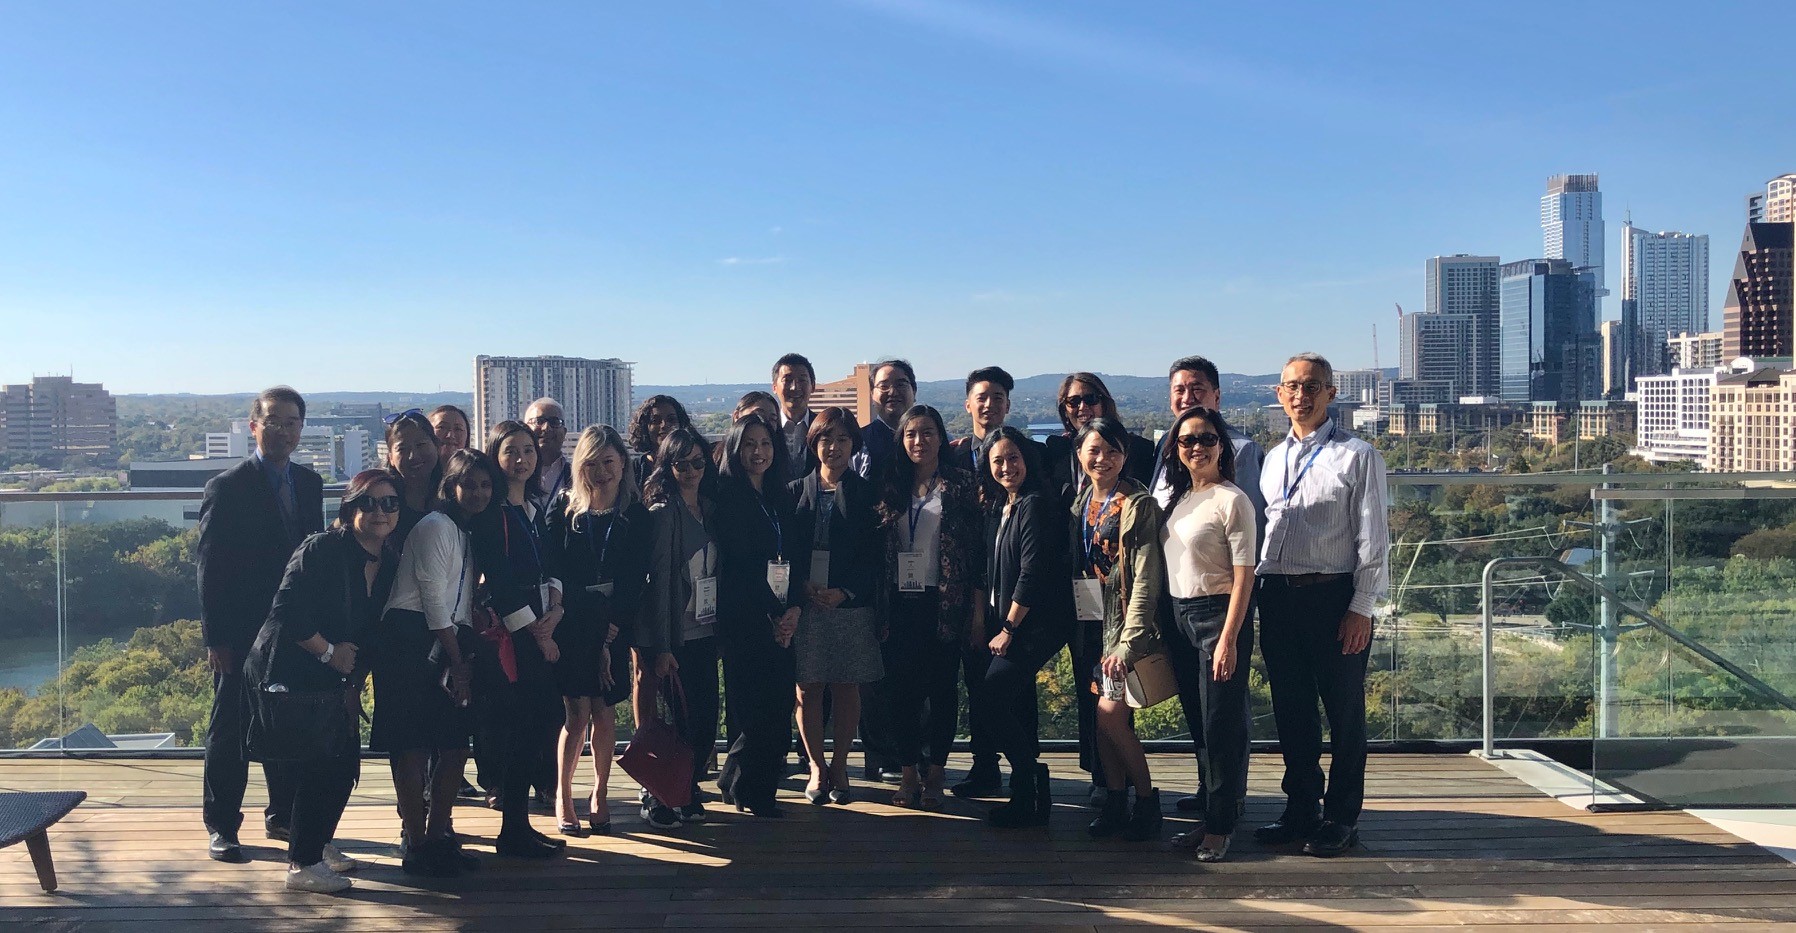 Attendees of the NAPABA Annual Convention, November 2019